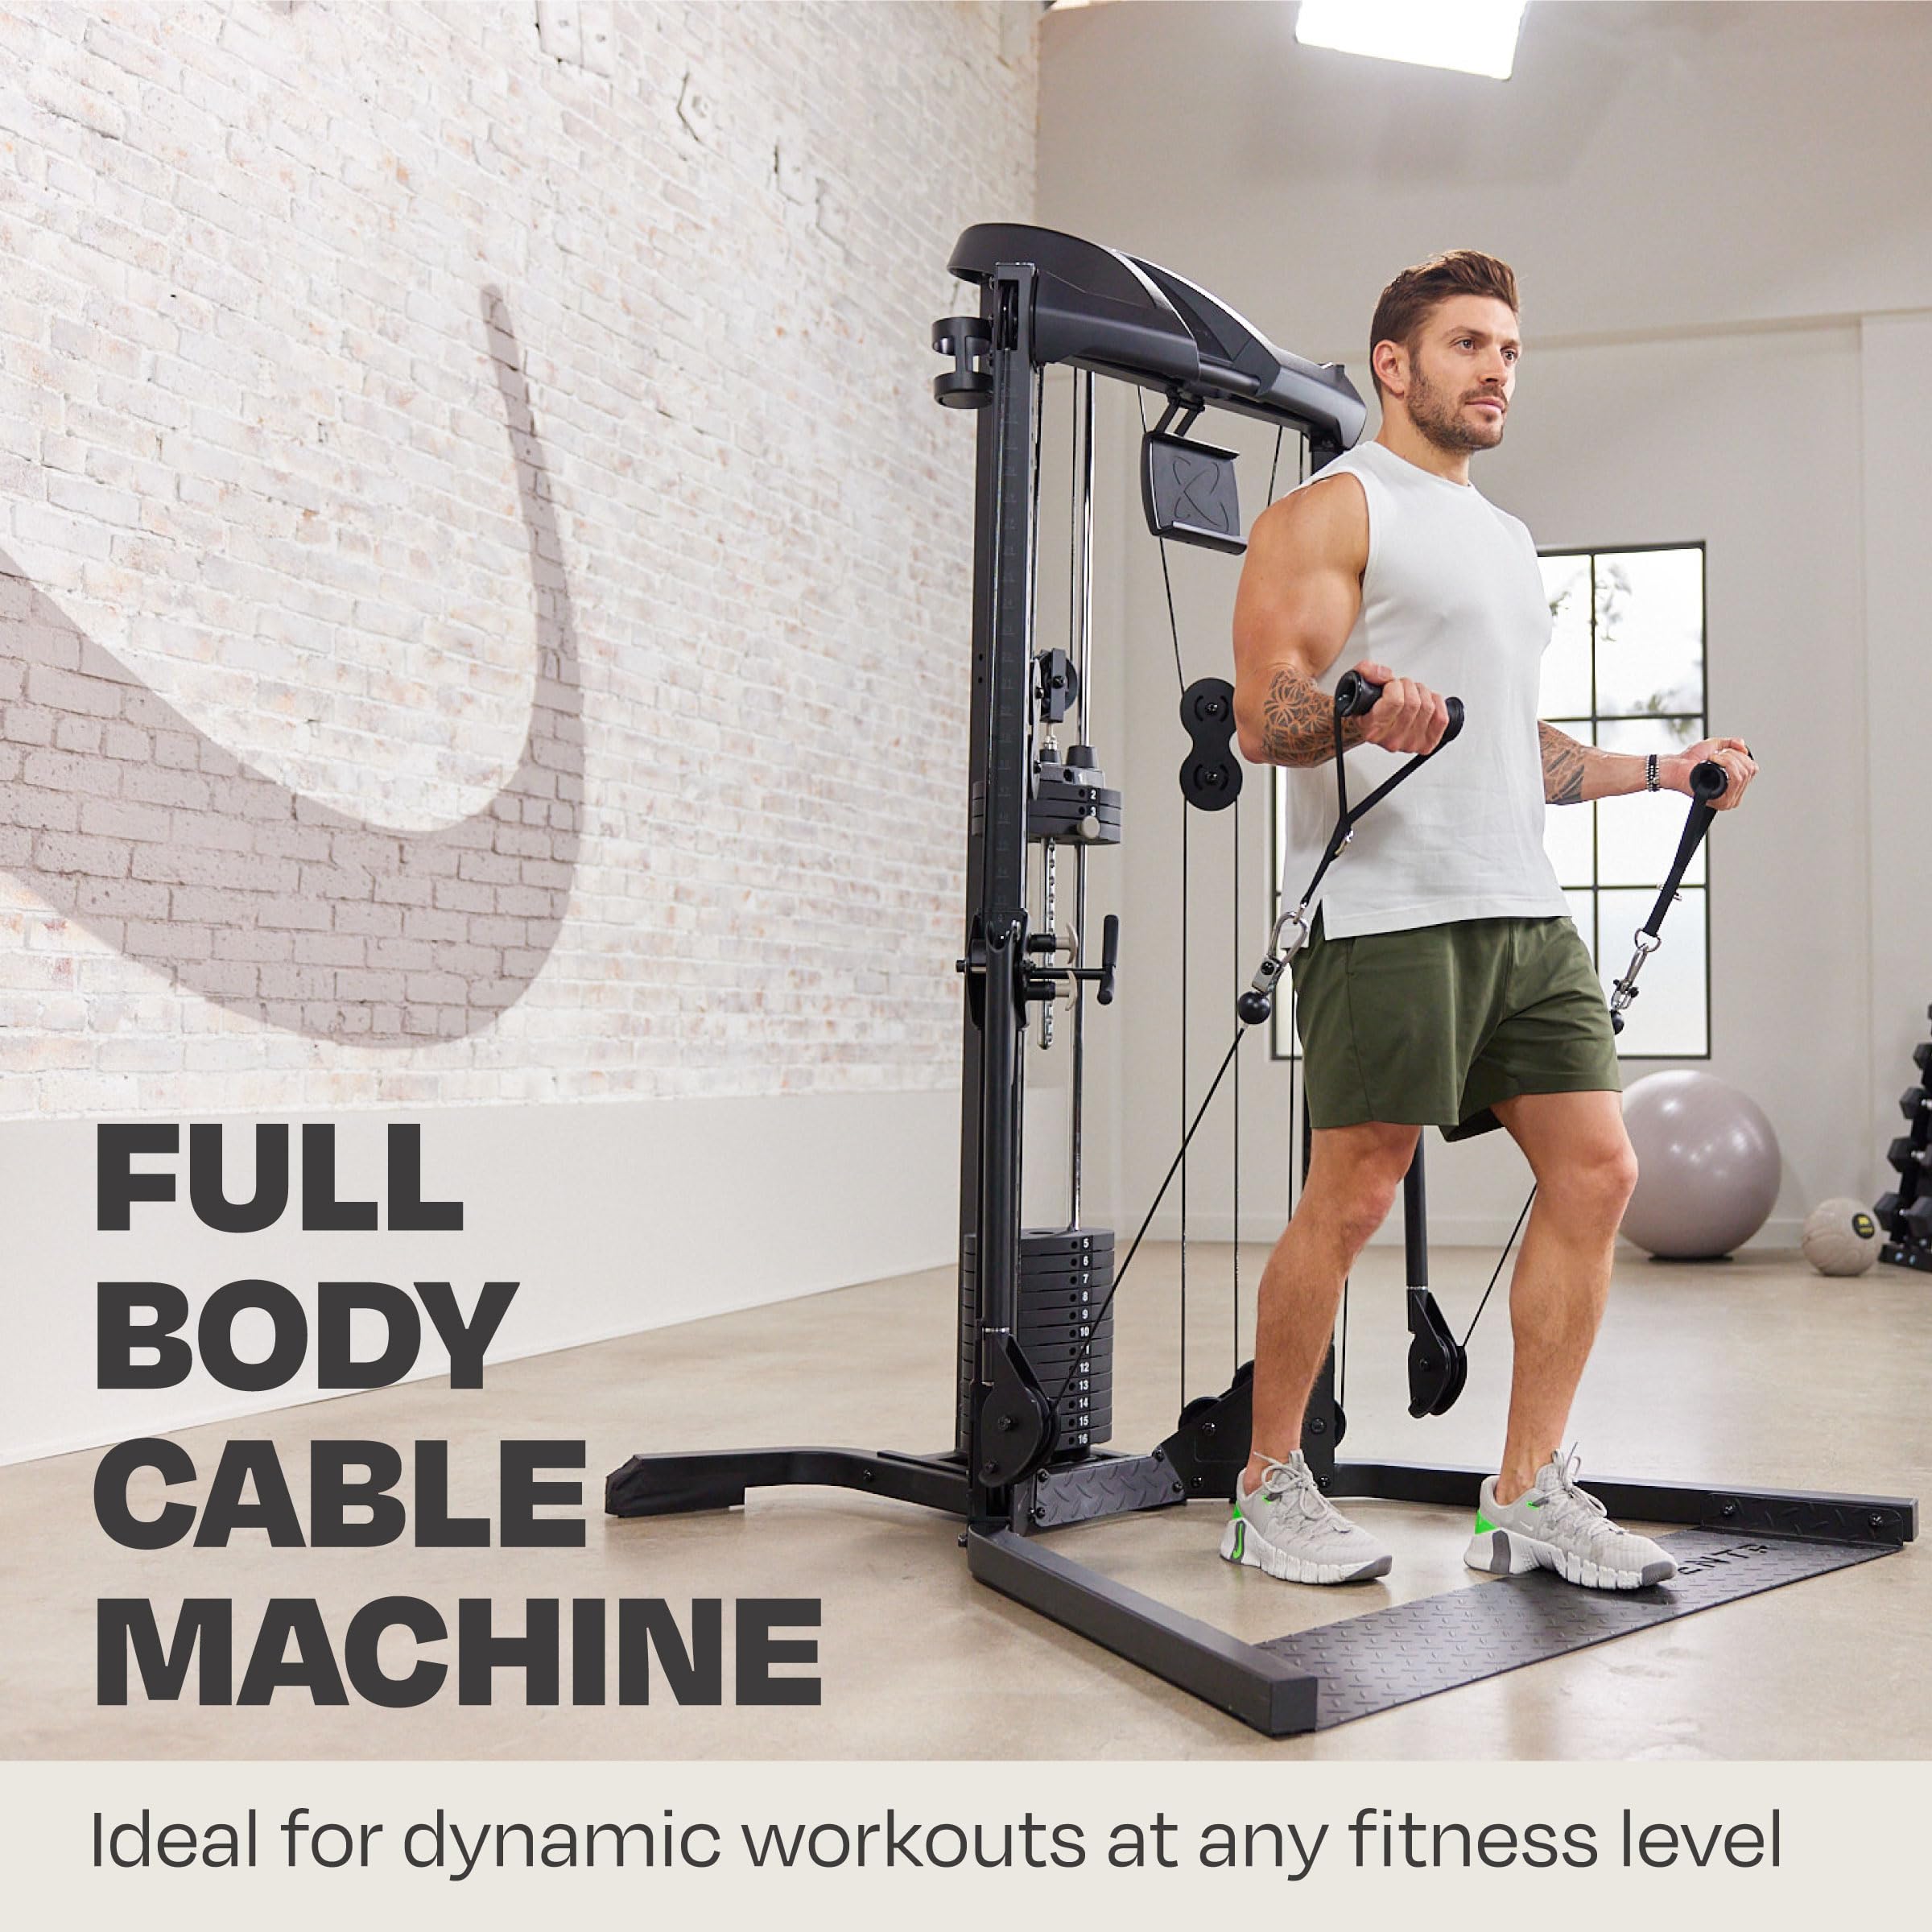 Home Gym Functional Trainer - Multifunctional Cable Machine Home Gym System - Workout Weight Machine for Strength Training - Full Body Compact Exercise & Fitness Equipment Set